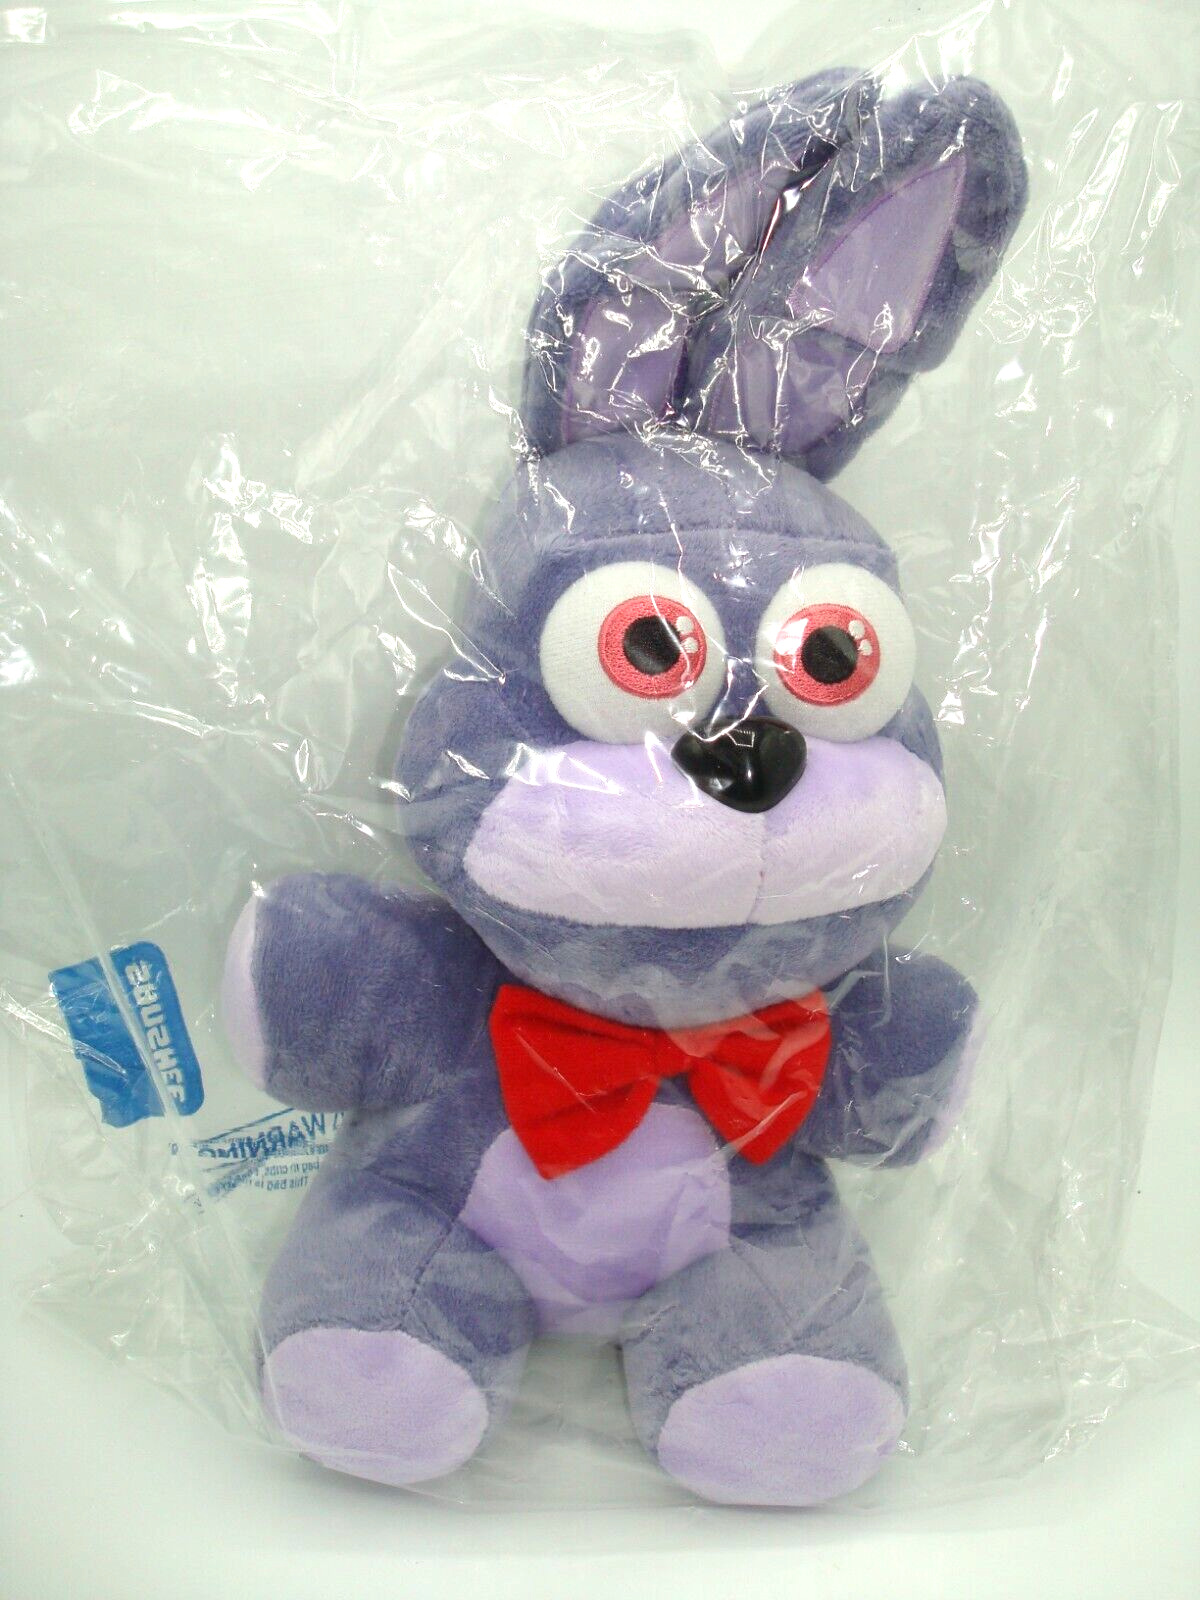 OFFICIAL SANSHEE FNAF BONNIE THE BUNNY PLUSH FIVE NIGHTS AT FREDDY\'S NEW SEALED